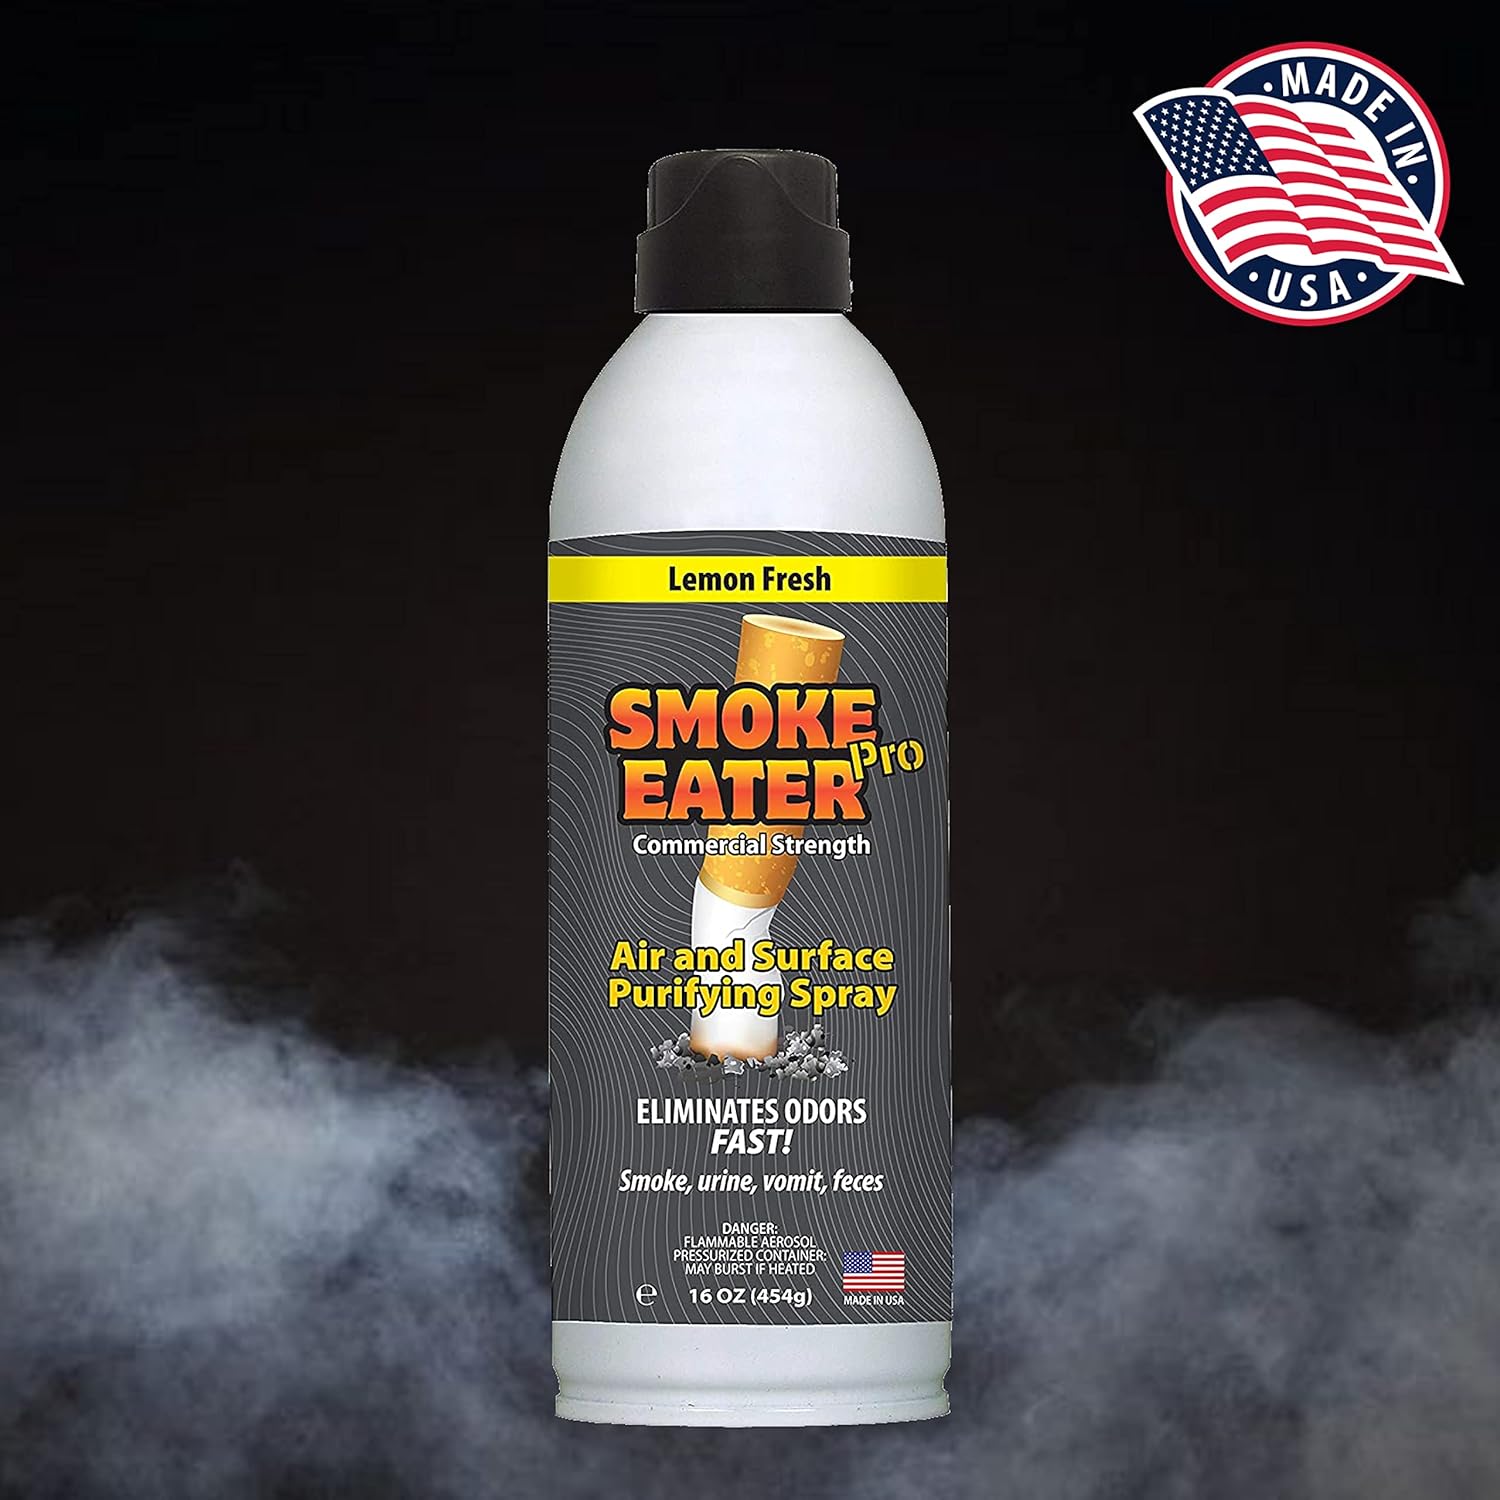 Smoke Eater Pro 16 oz Commercial Strength Fabric Odor Eliminator - Eradicates the Toughest Odors from any Apartment, Airbnb, Car (Rideshare) - No More Smoke or Bad Food Smells Left Behind. : Industrial & Scientific